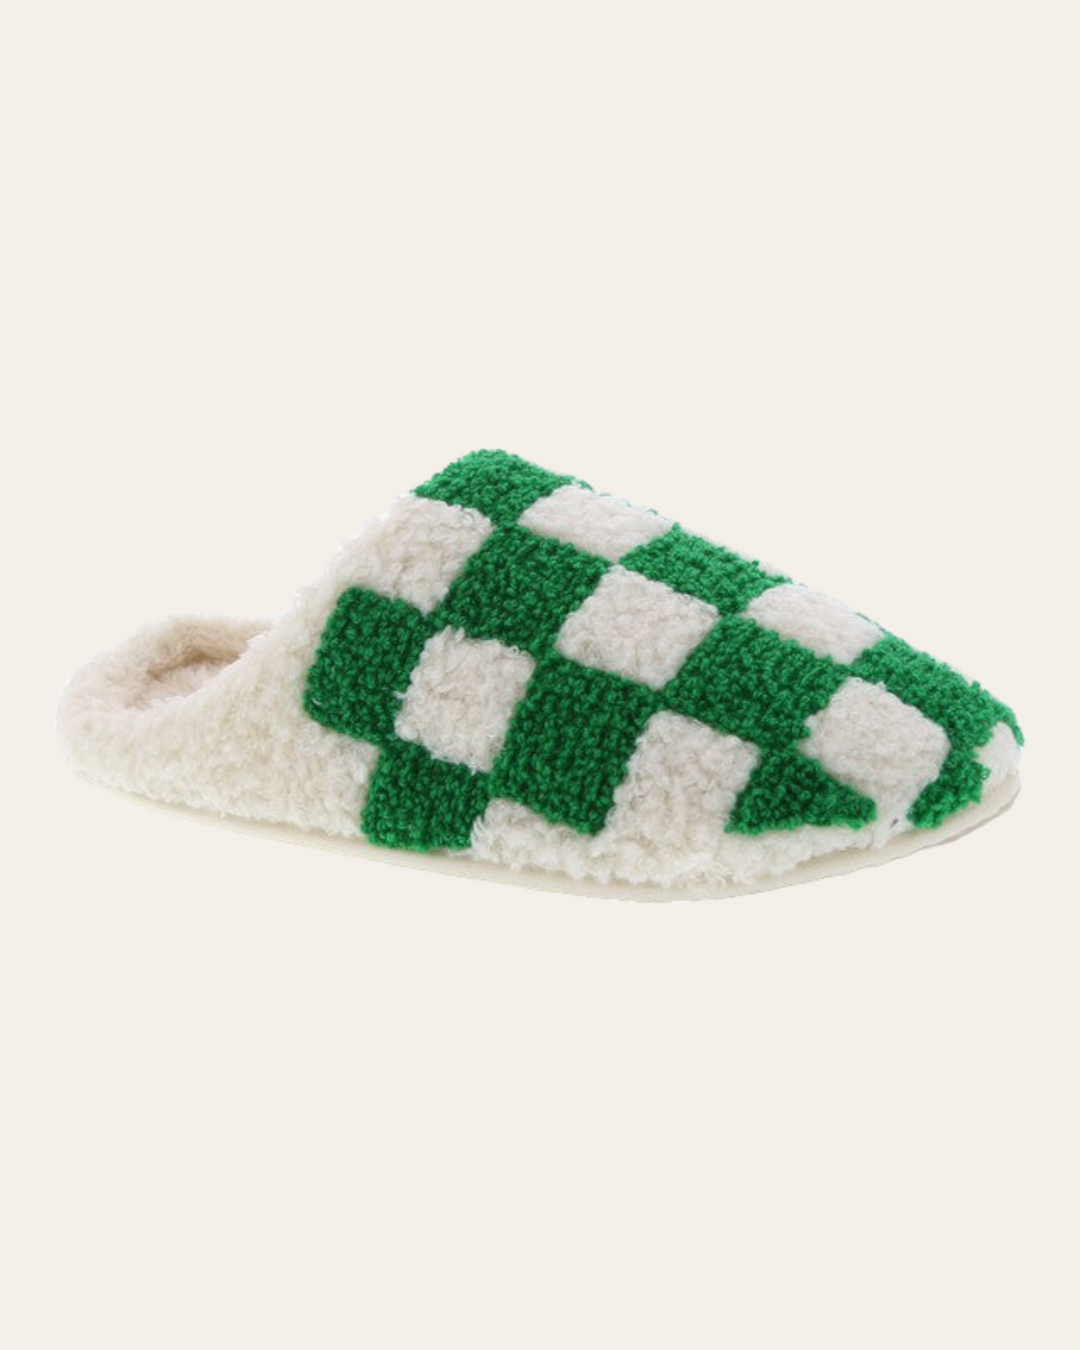 a side view of the checkered fuzzy slipper on a white background